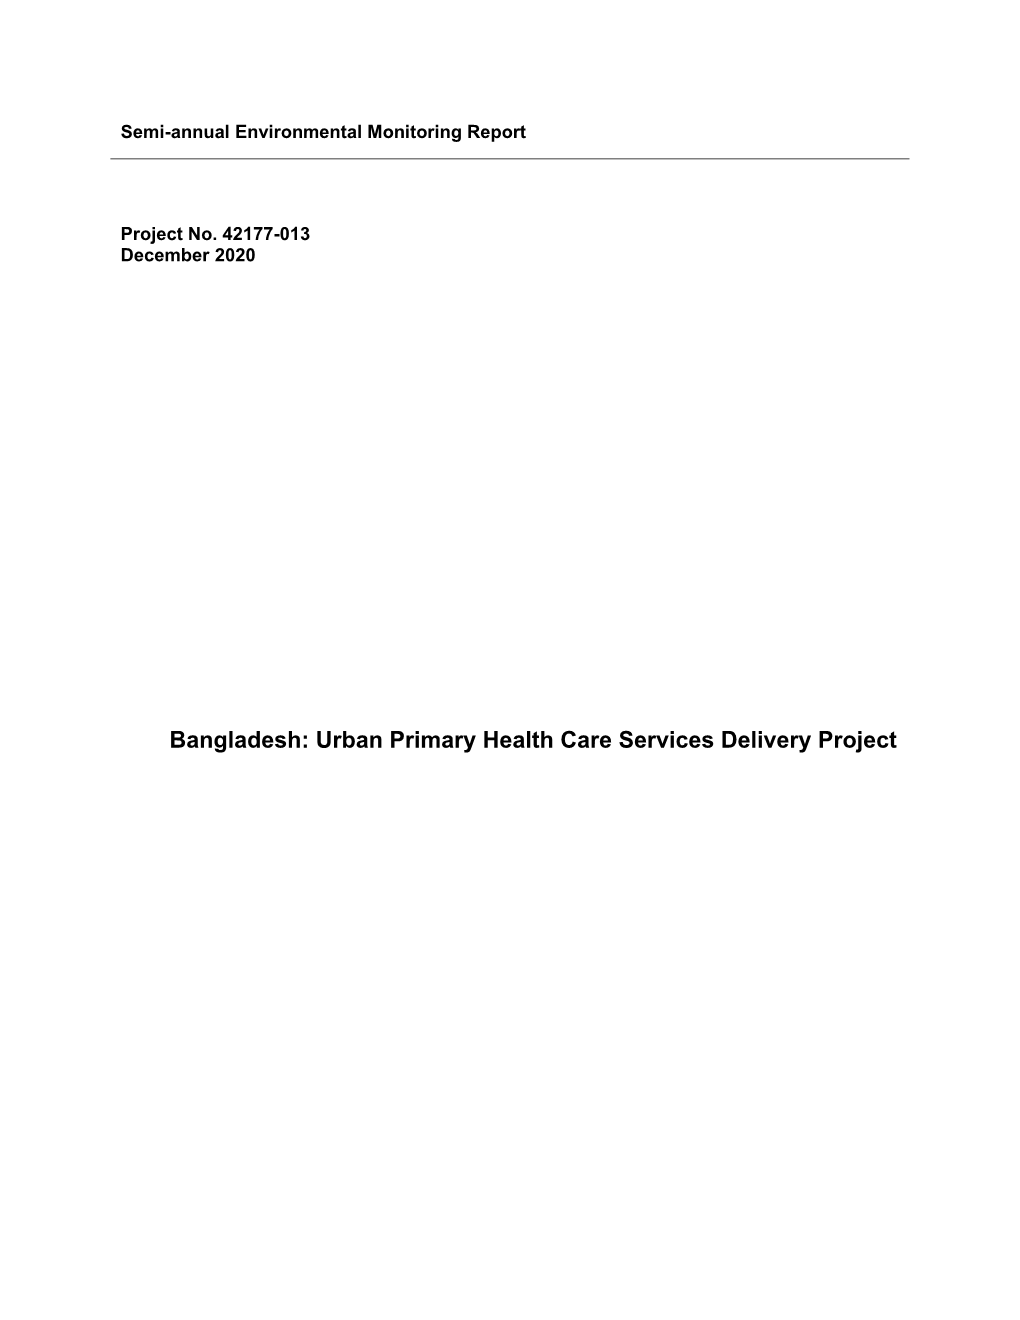 42177-013: Urban Primary Health Care Services Delivery Project